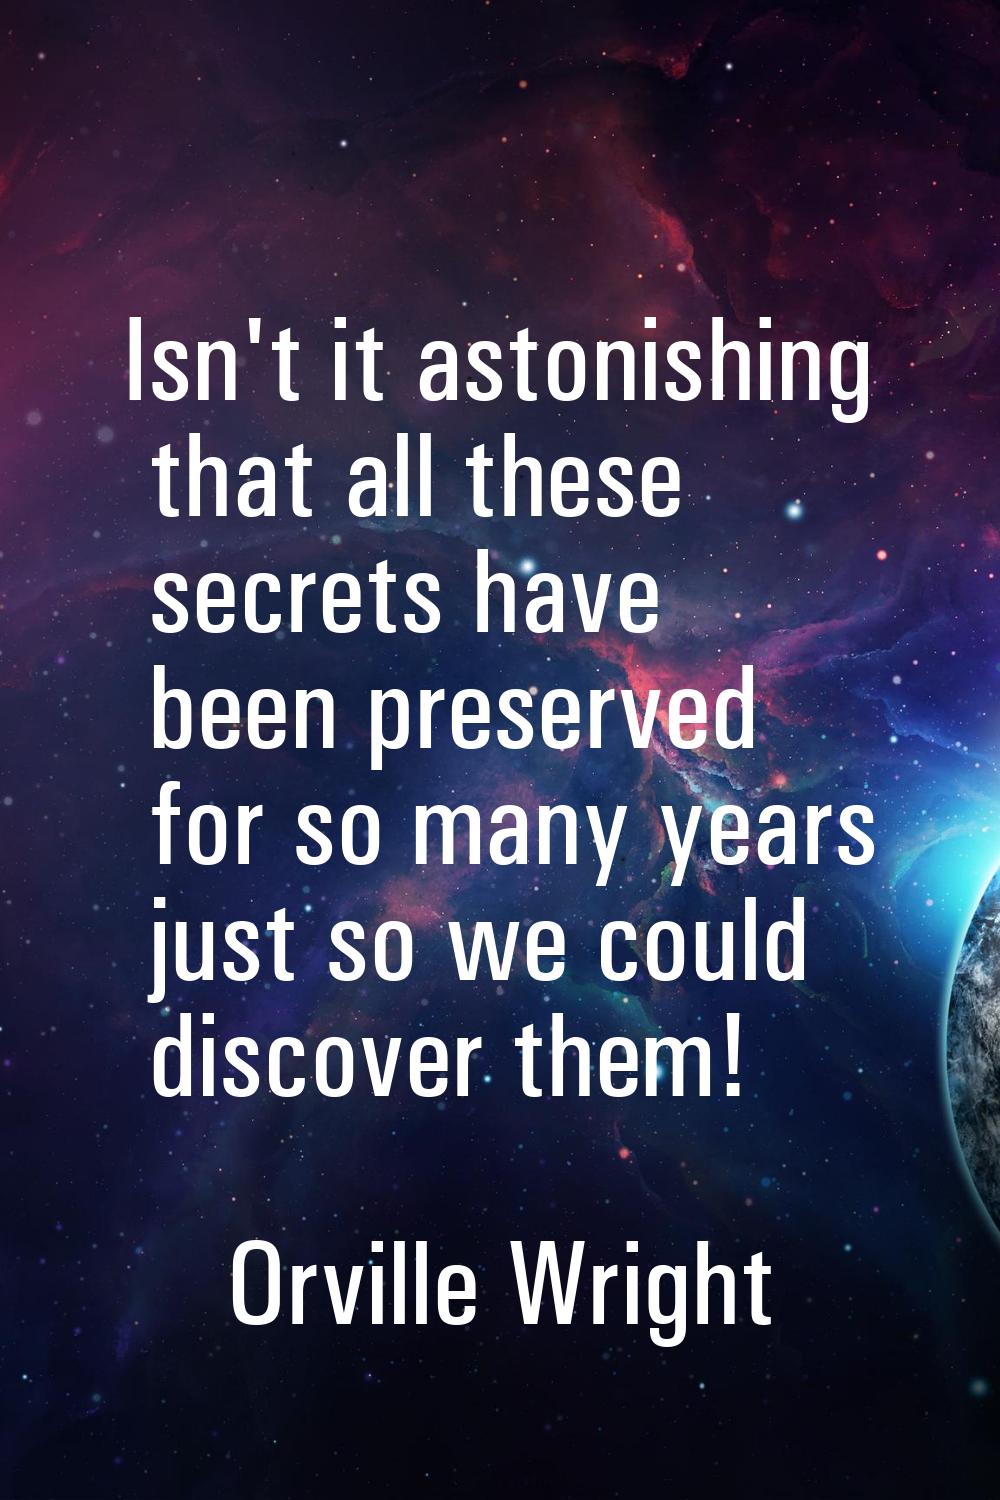 Isn't it astonishing that all these secrets have been preserved for so many years just so we could 